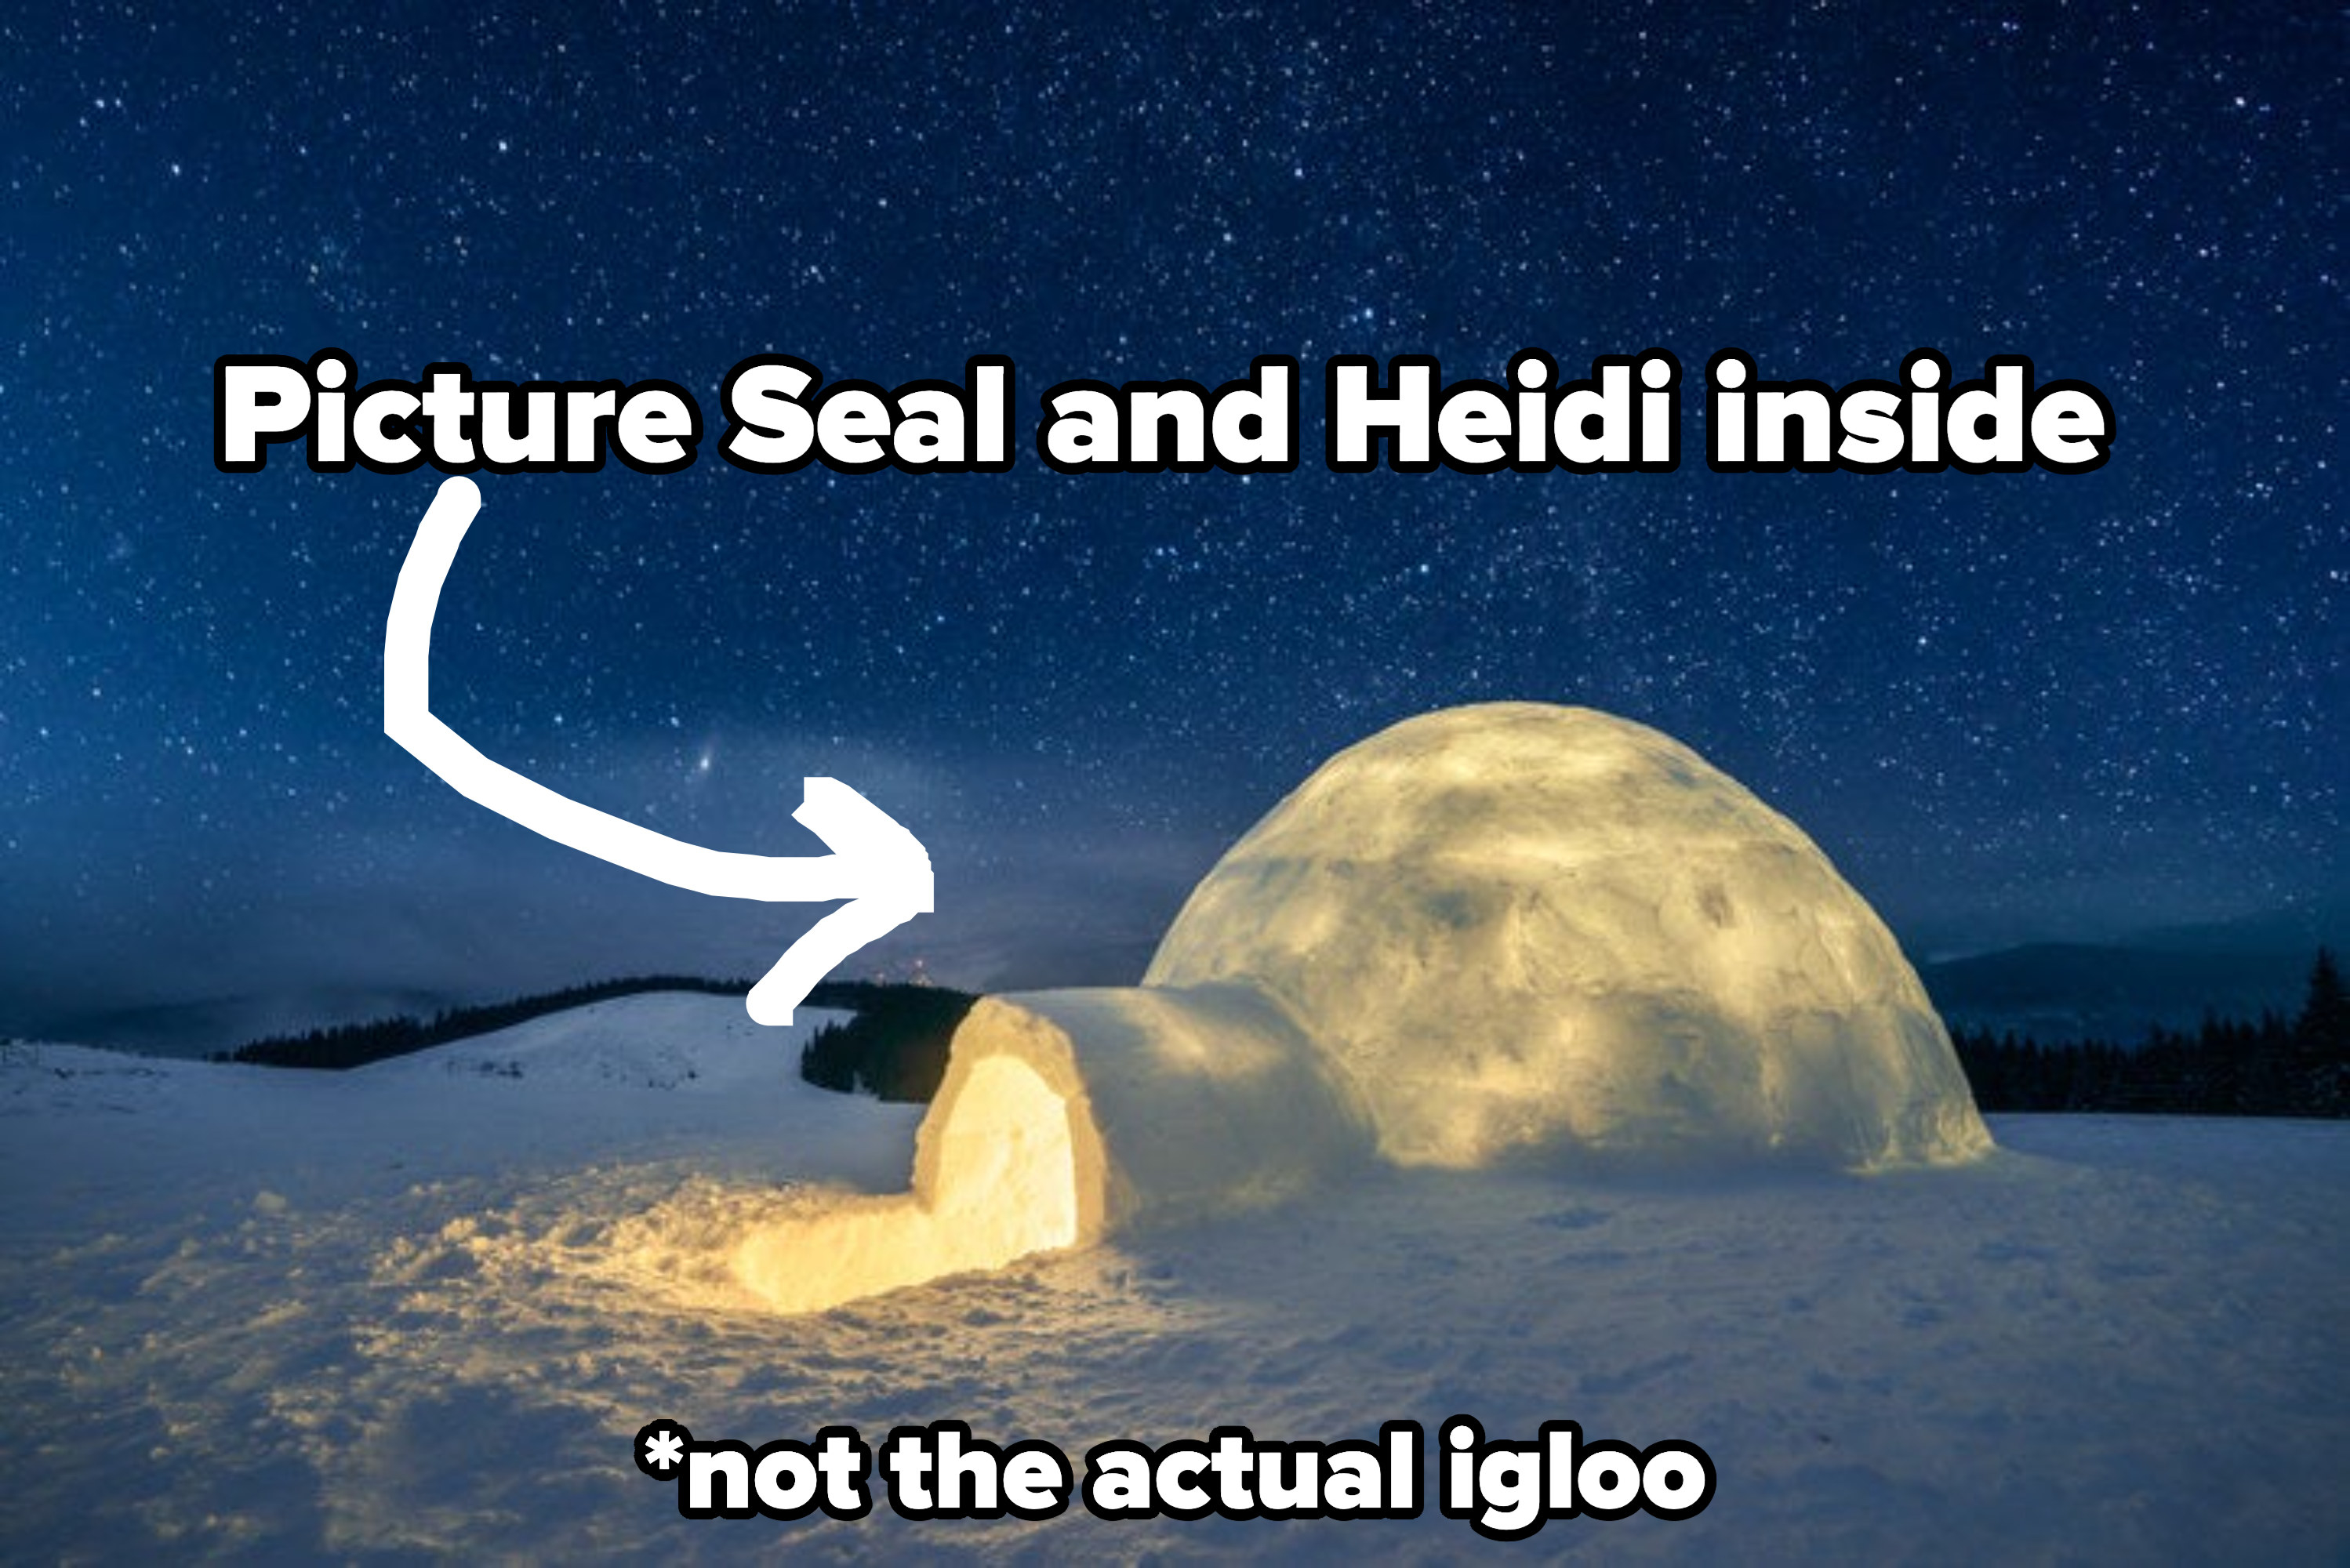 igloo (but not the actual igloo) with an arrow pointing to it and the words &quot;picture seal and heidi inside&quot;